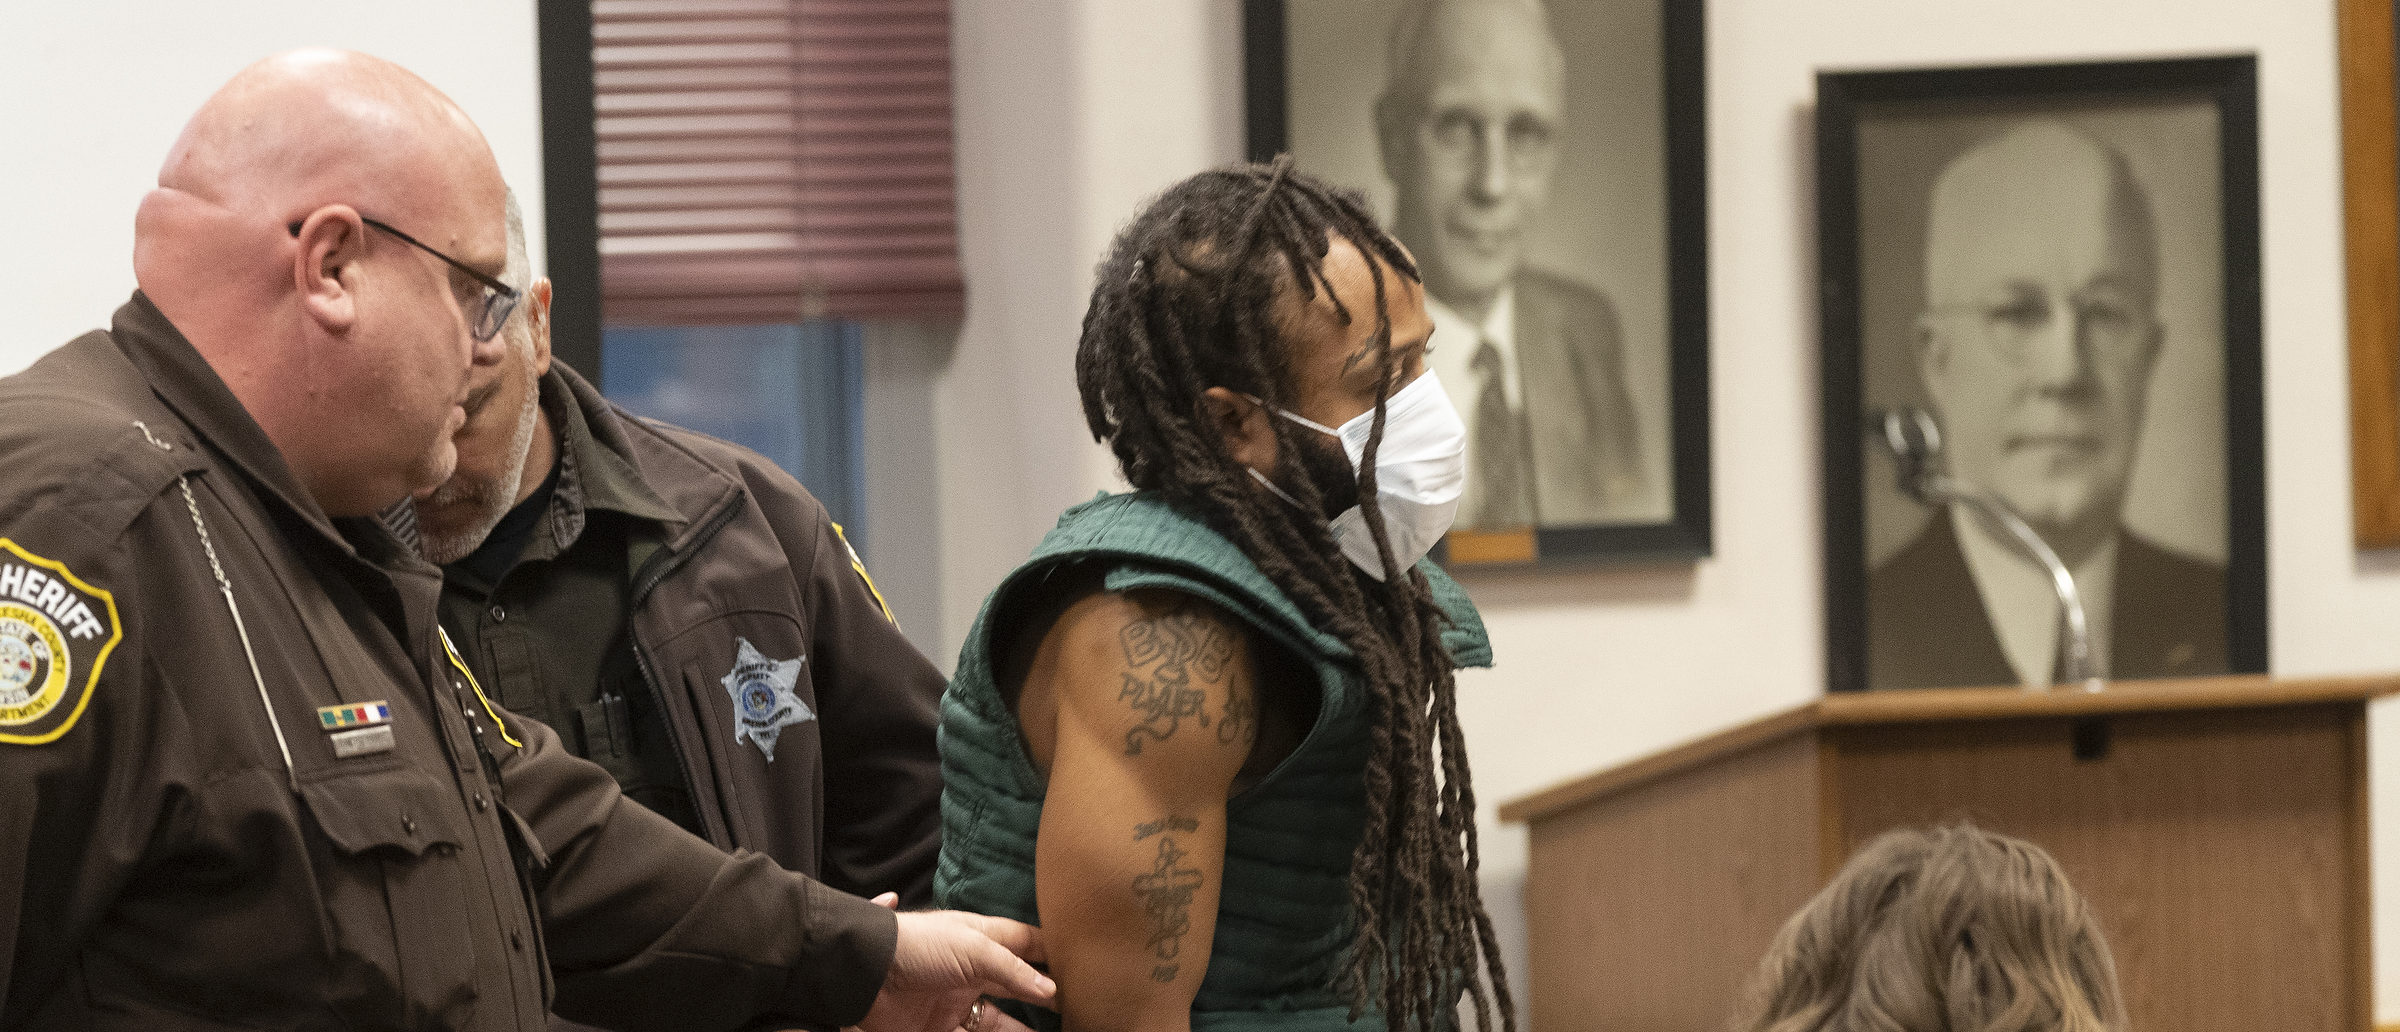 WAUKESHA, WISCONSIN - NOVEMBER 21: Darrell Brooks (C) appears at Waukesha County Court on November 23, 2021 in Waukesha, Wisconsin. Brooks is charged with killing five people and injuring nearly 50 after driving through a Christmas parade with his sport utility vehicle on November 21. (Photo by Mark Hoffman-Pool/Getty Images)